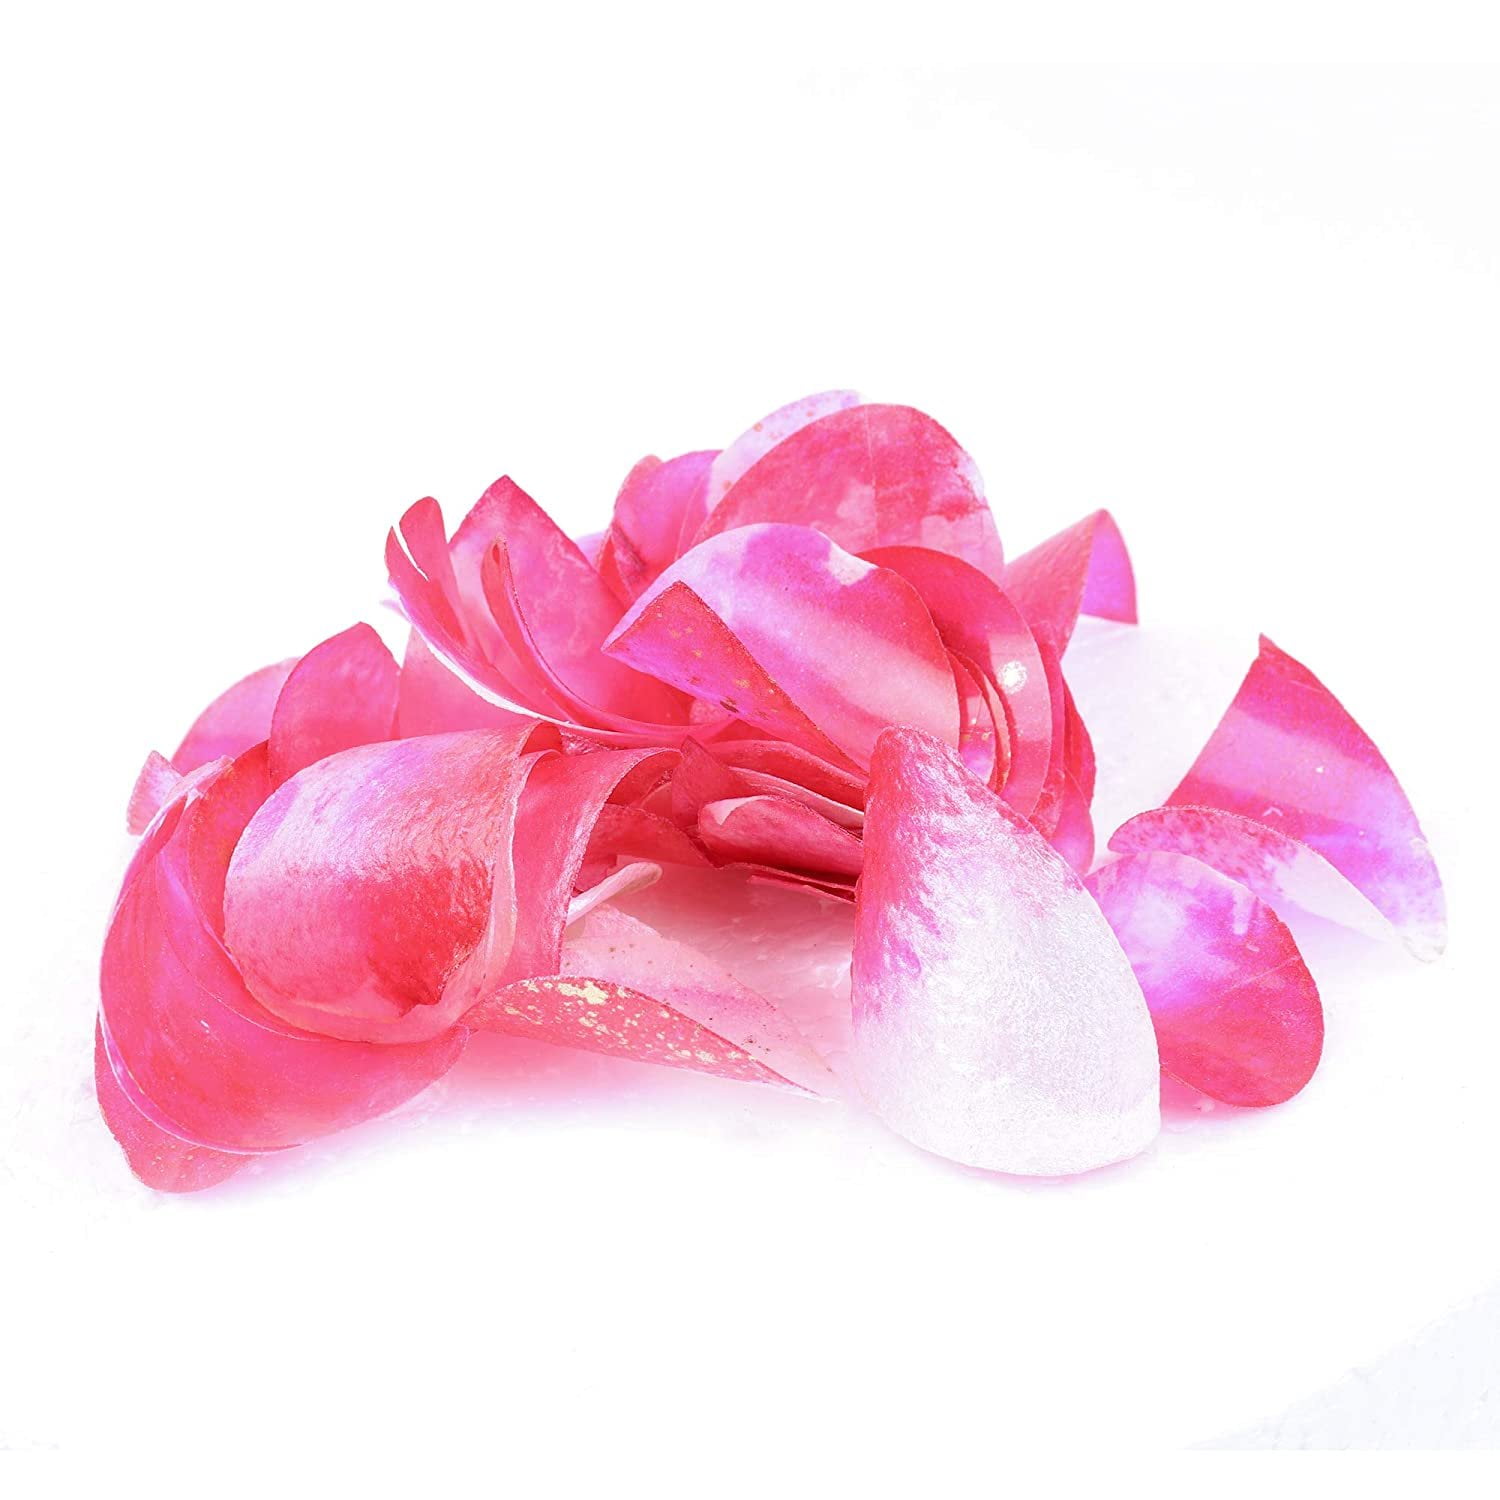 Crystal Candy Cerise-Pink-&-White Edible Petals - Colorful Edible